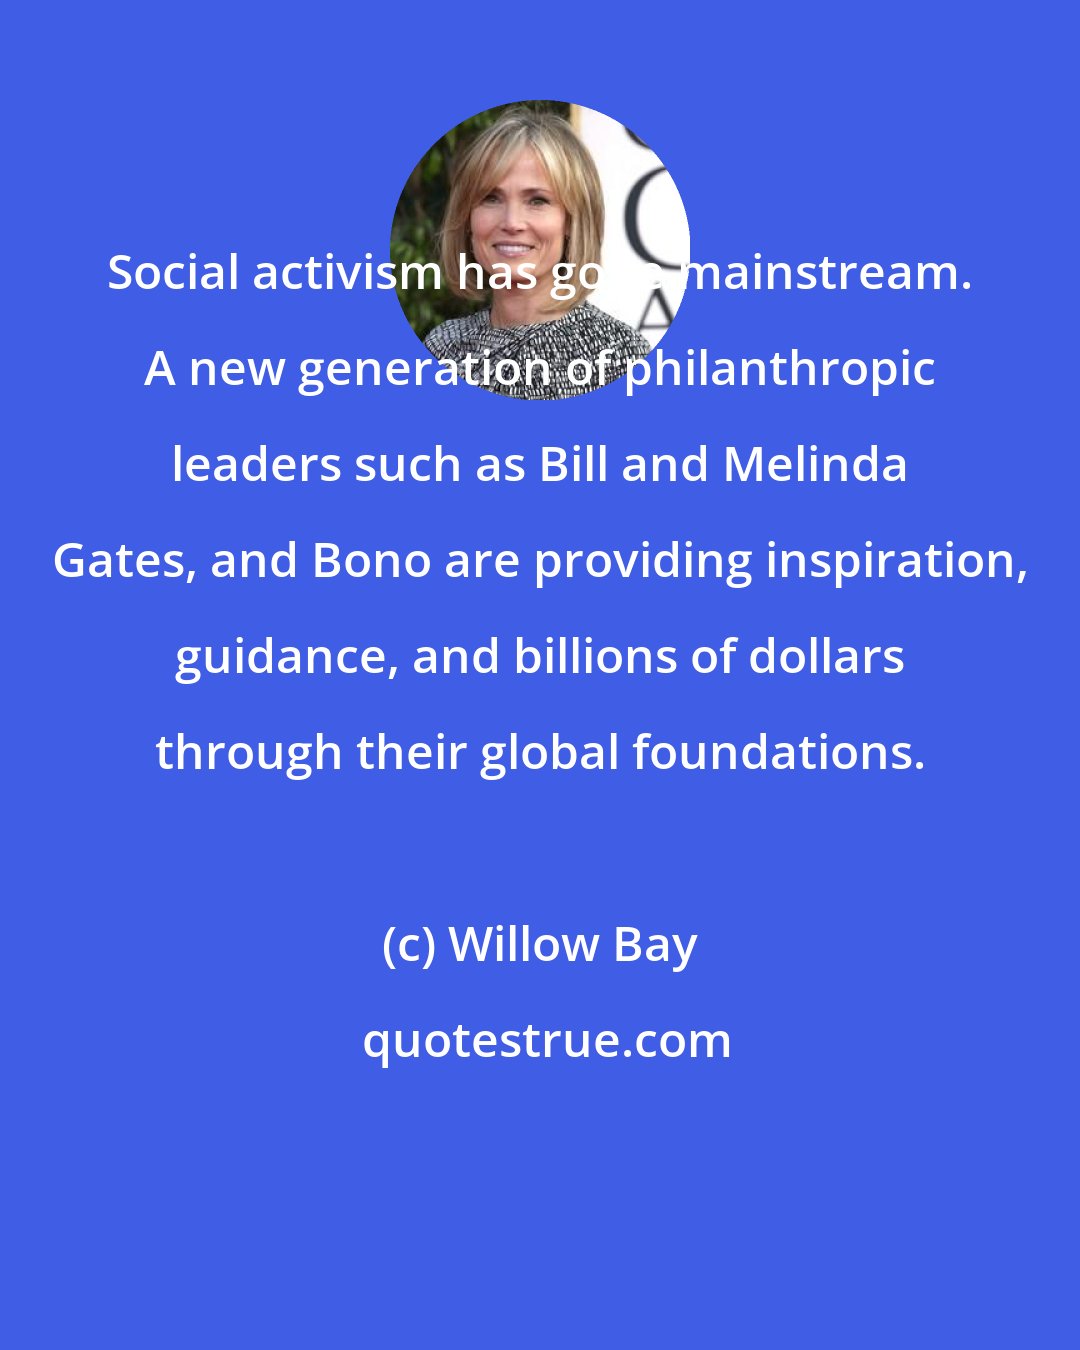 Willow Bay: Social activism has gone mainstream. A new generation of philanthropic leaders such as Bill and Melinda Gates, and Bono are providing inspiration, guidance, and billions of dollars through their global foundations.